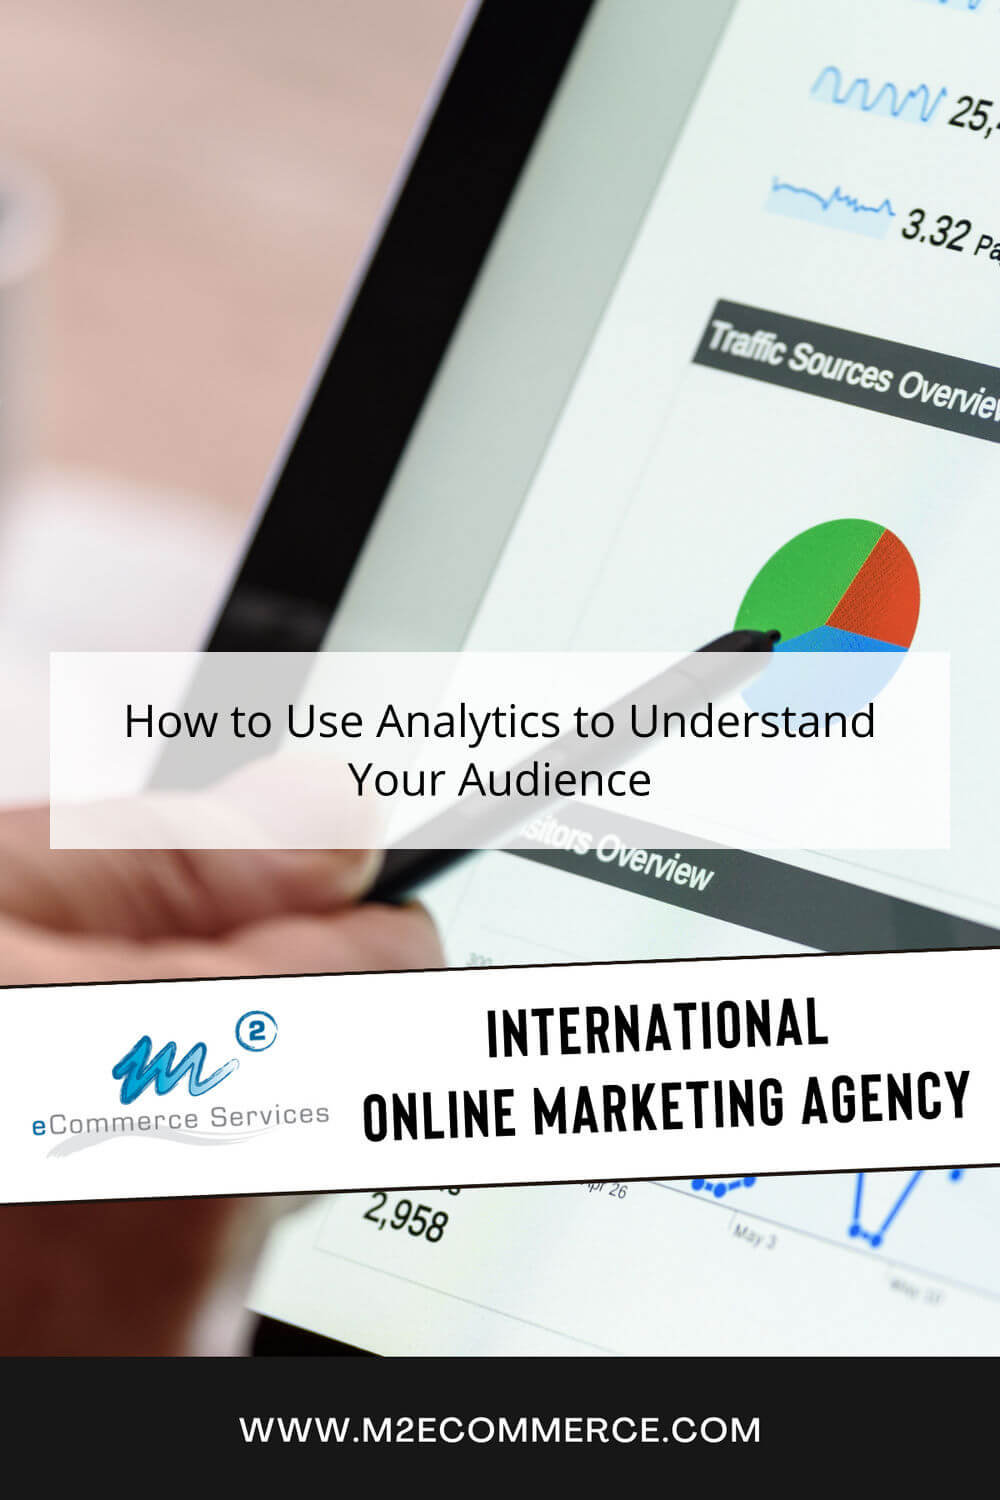 How to Use Analytics to Understand Your Audience